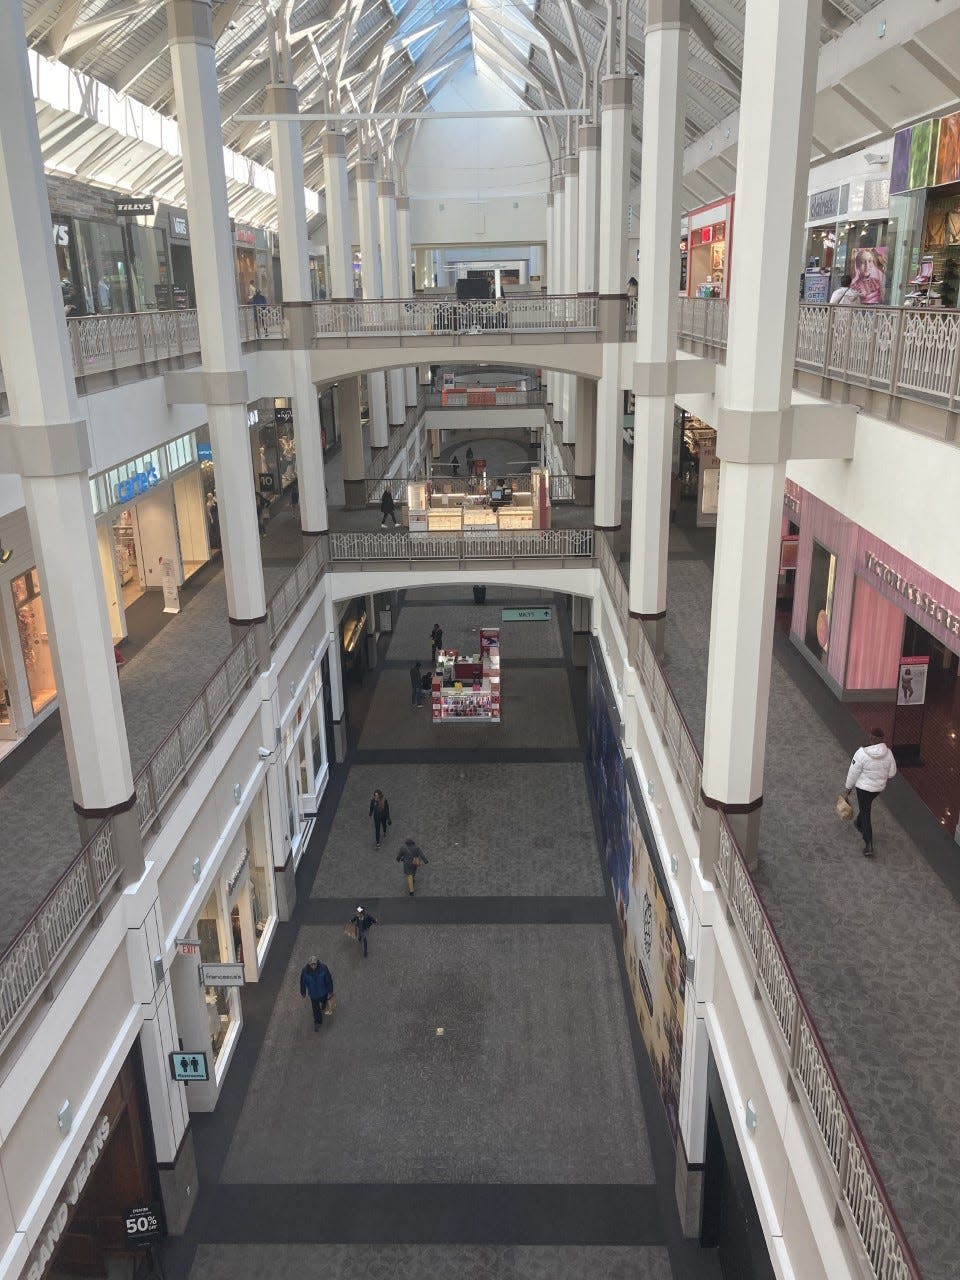 The Providence Place mall uses carpet on its walkways.